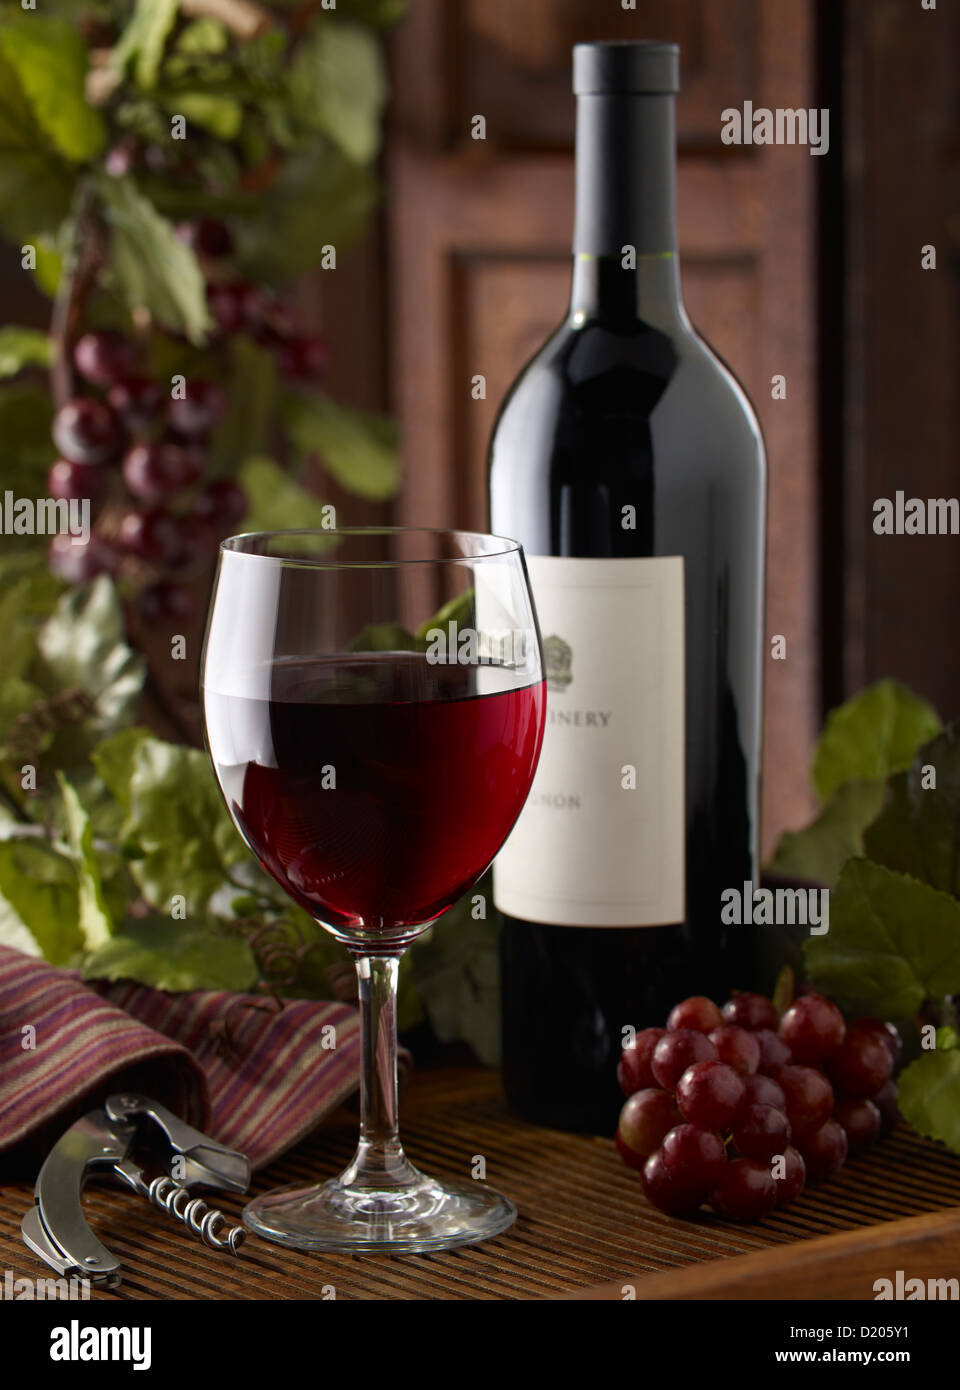 Glass of red wine with bottle Stock Photo